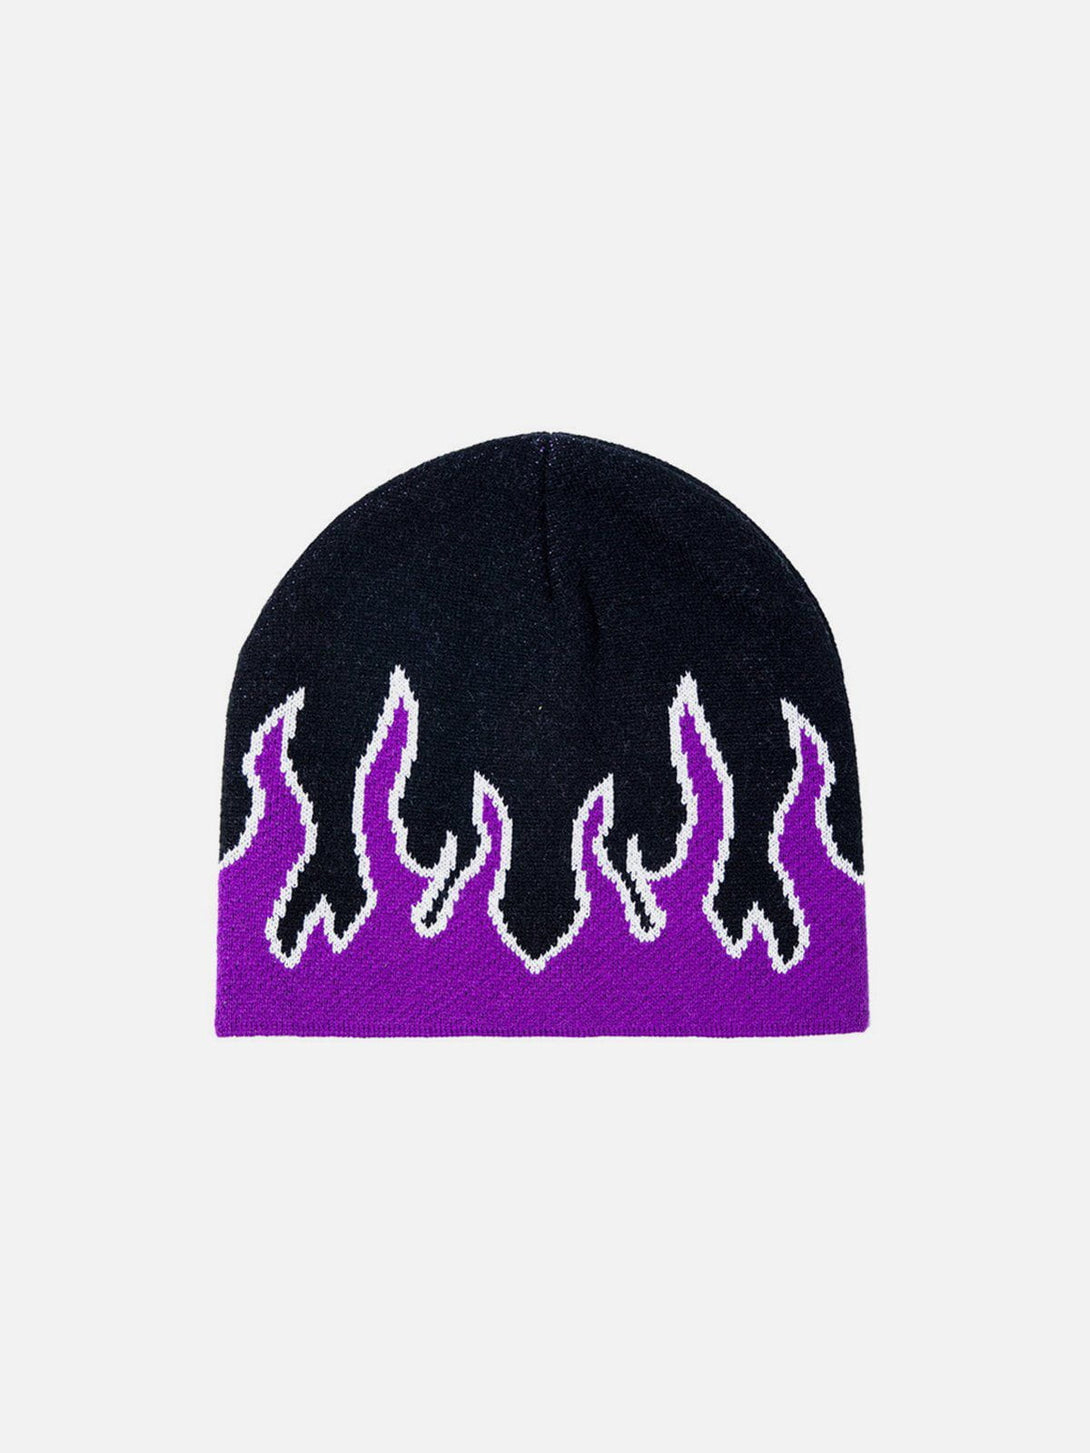 Levefly - Flame Elements Hat - Streetwear Fashion - levefly.com